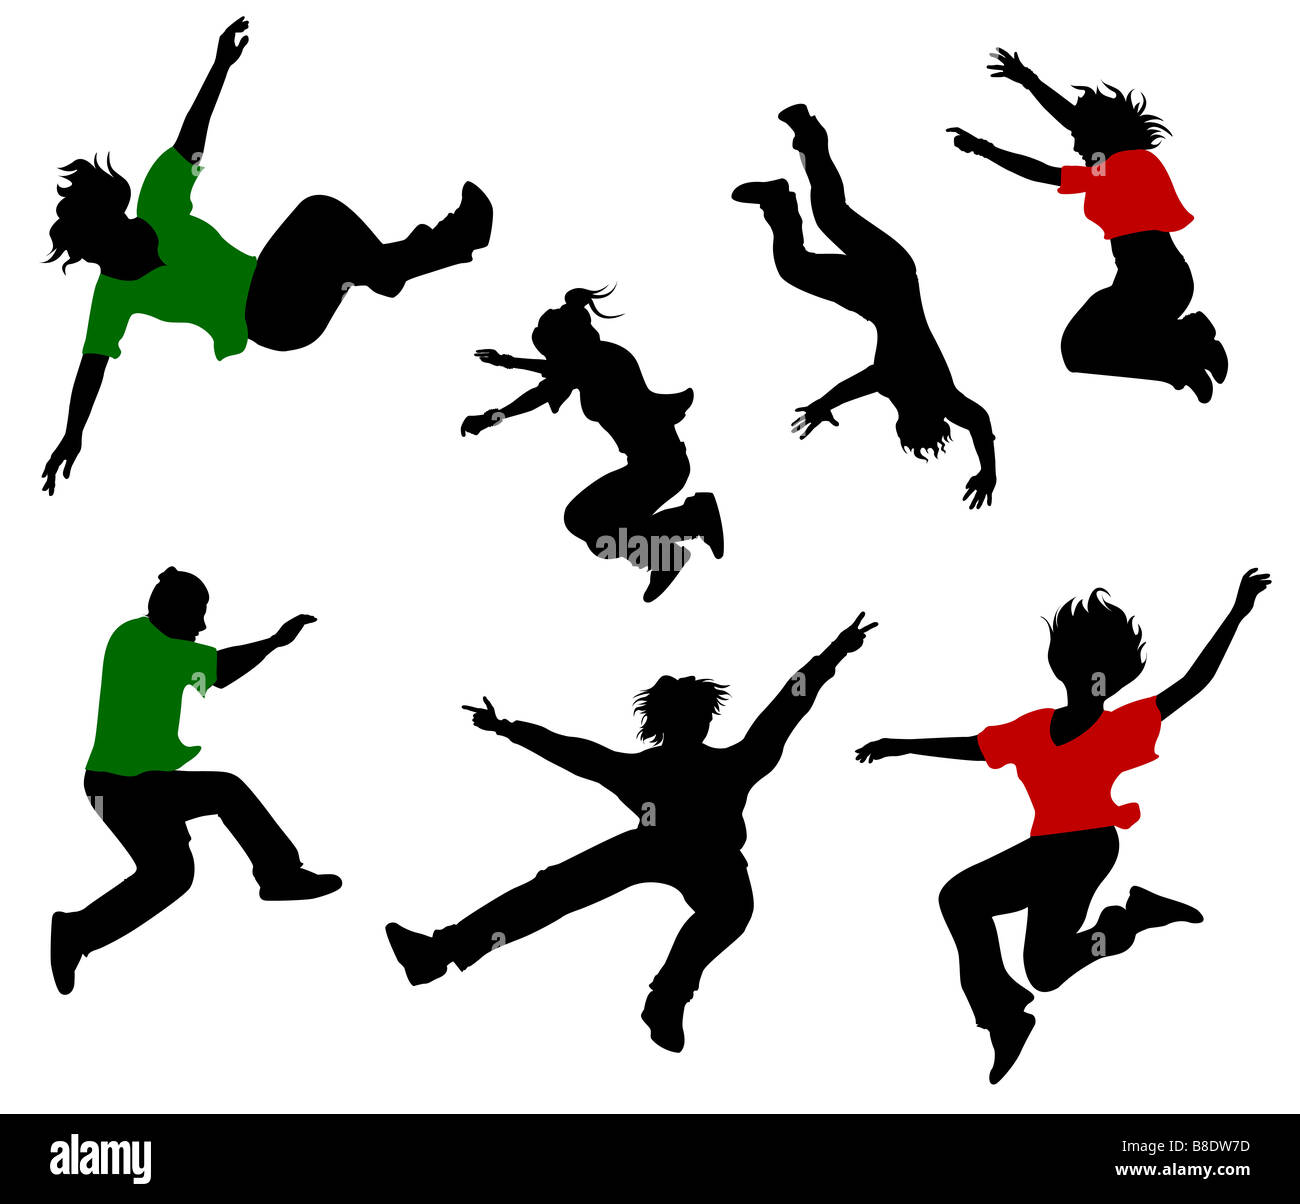 Silhouettes of seven jumping and fallen people Stock Photo